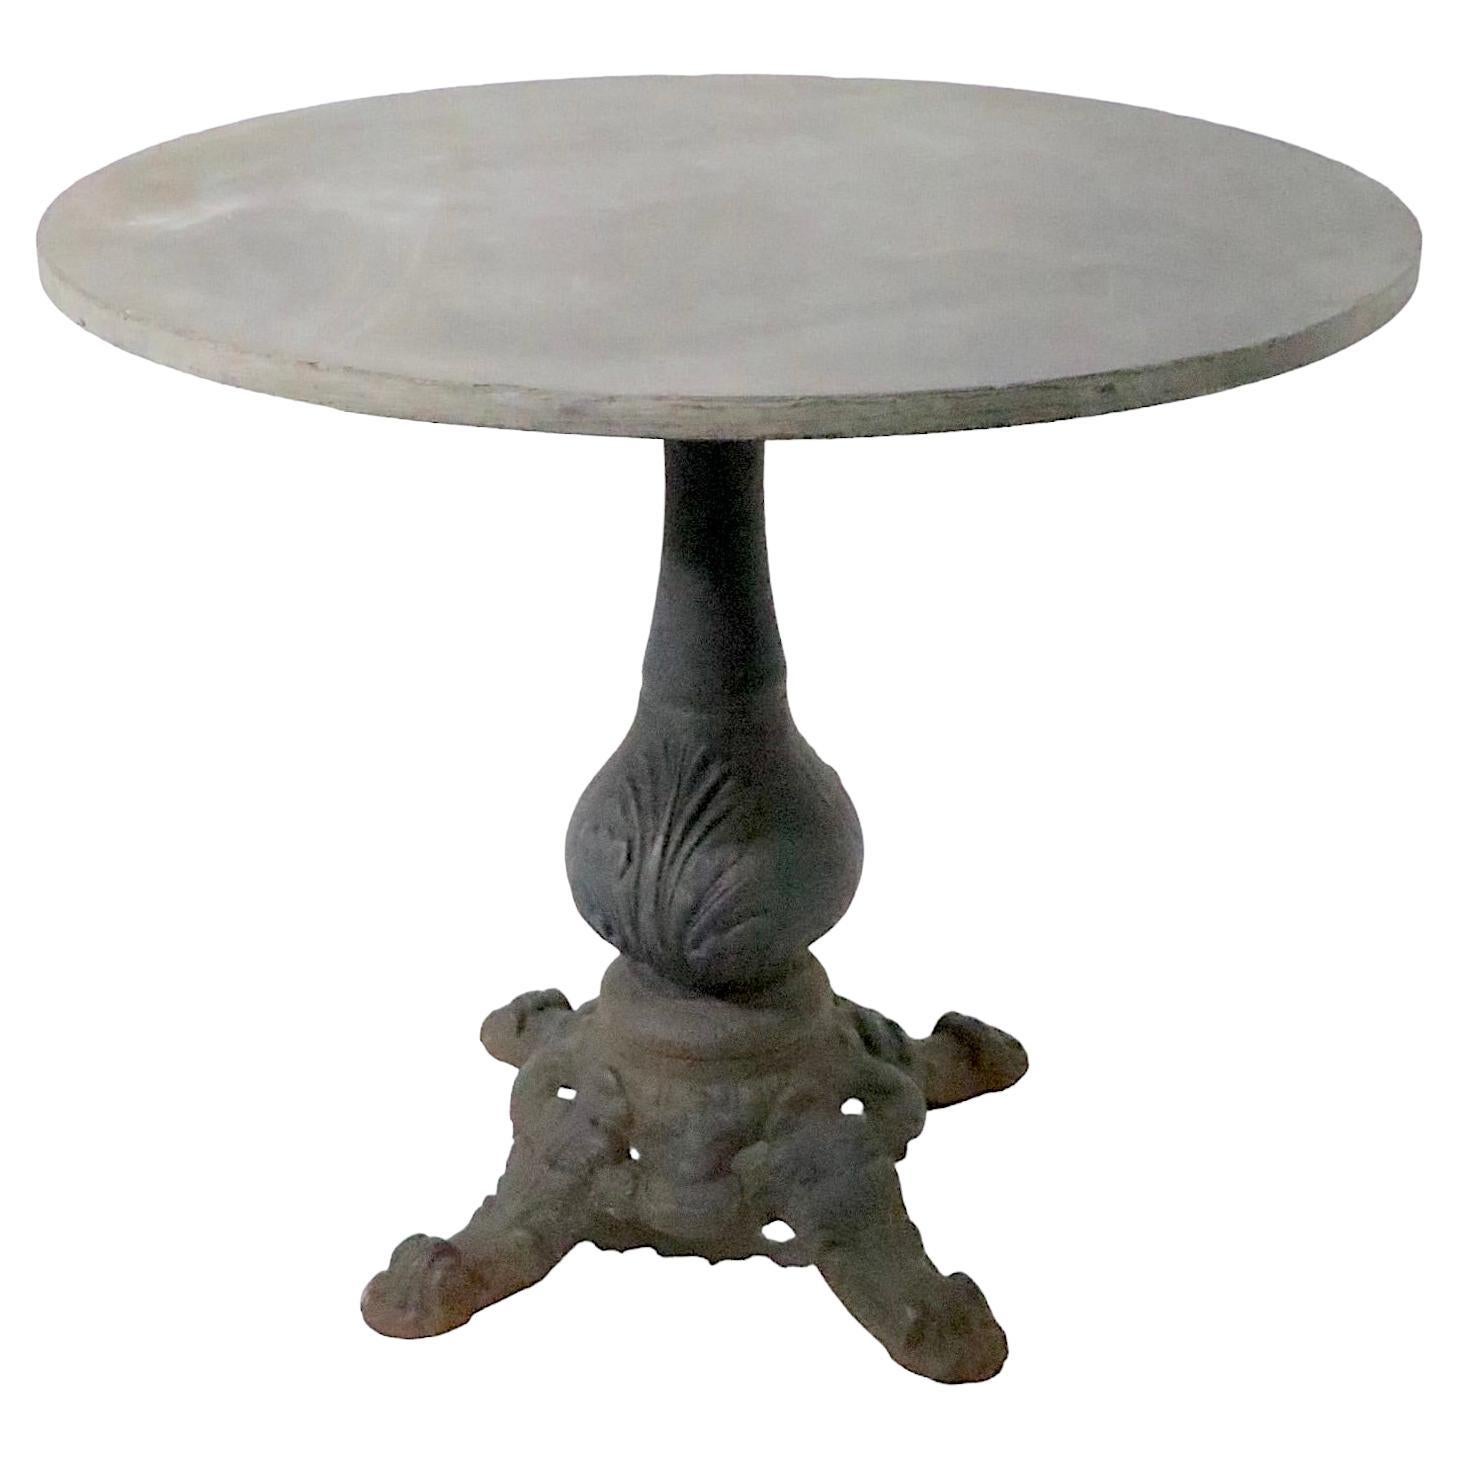 Granite Top Cast Iron Base French Style Cafe Bistro Garden Table c 1920 - 1950s